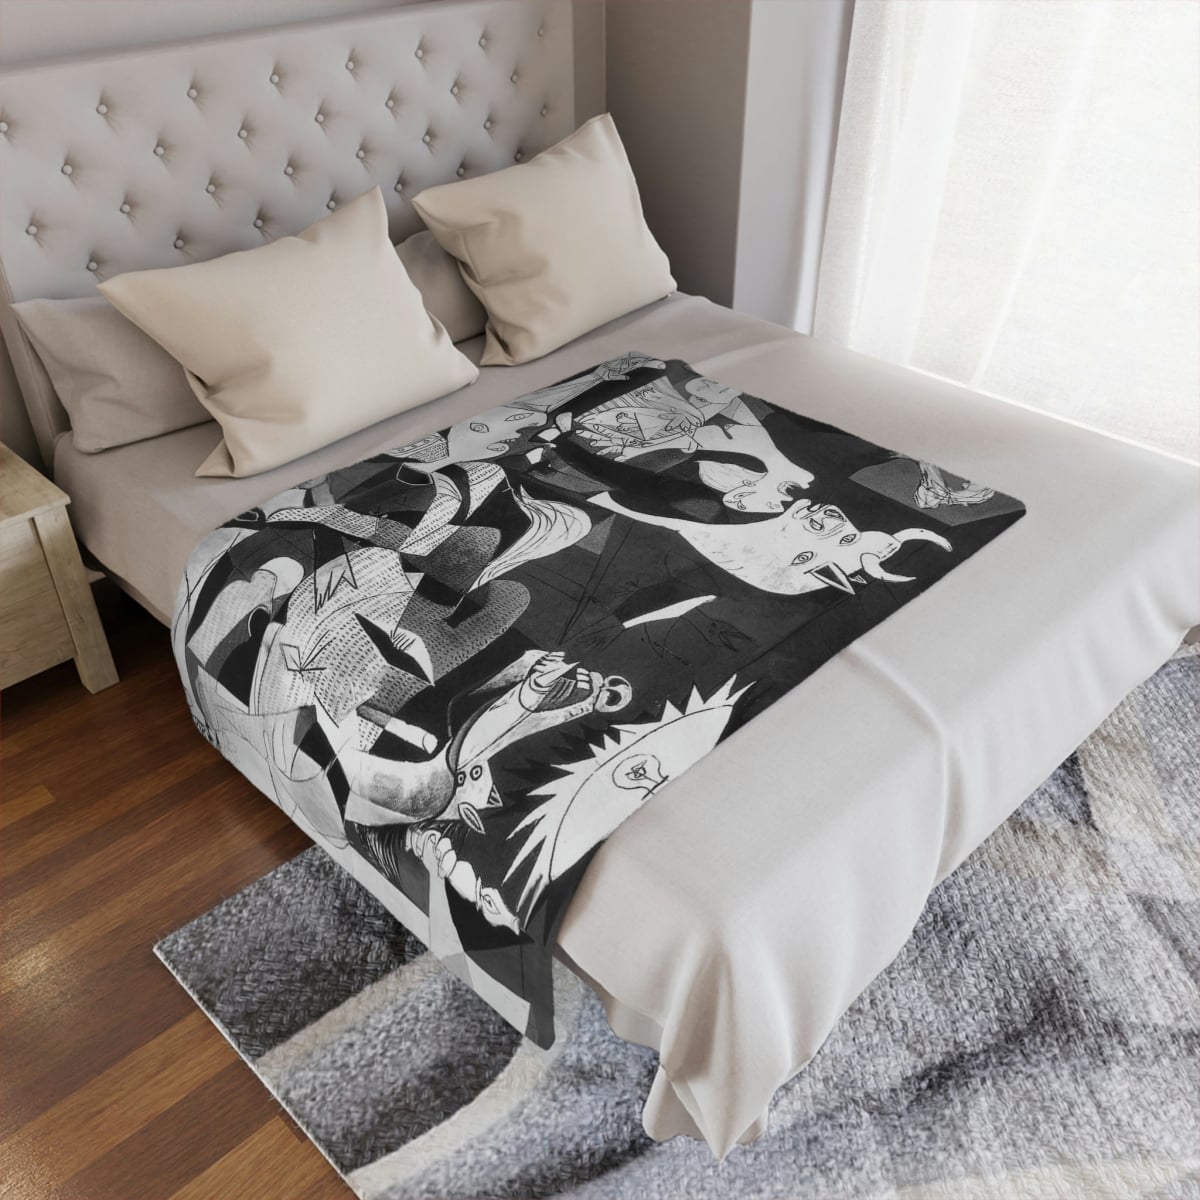 Artistic black and white blanket inspired by Picasso's Guernica